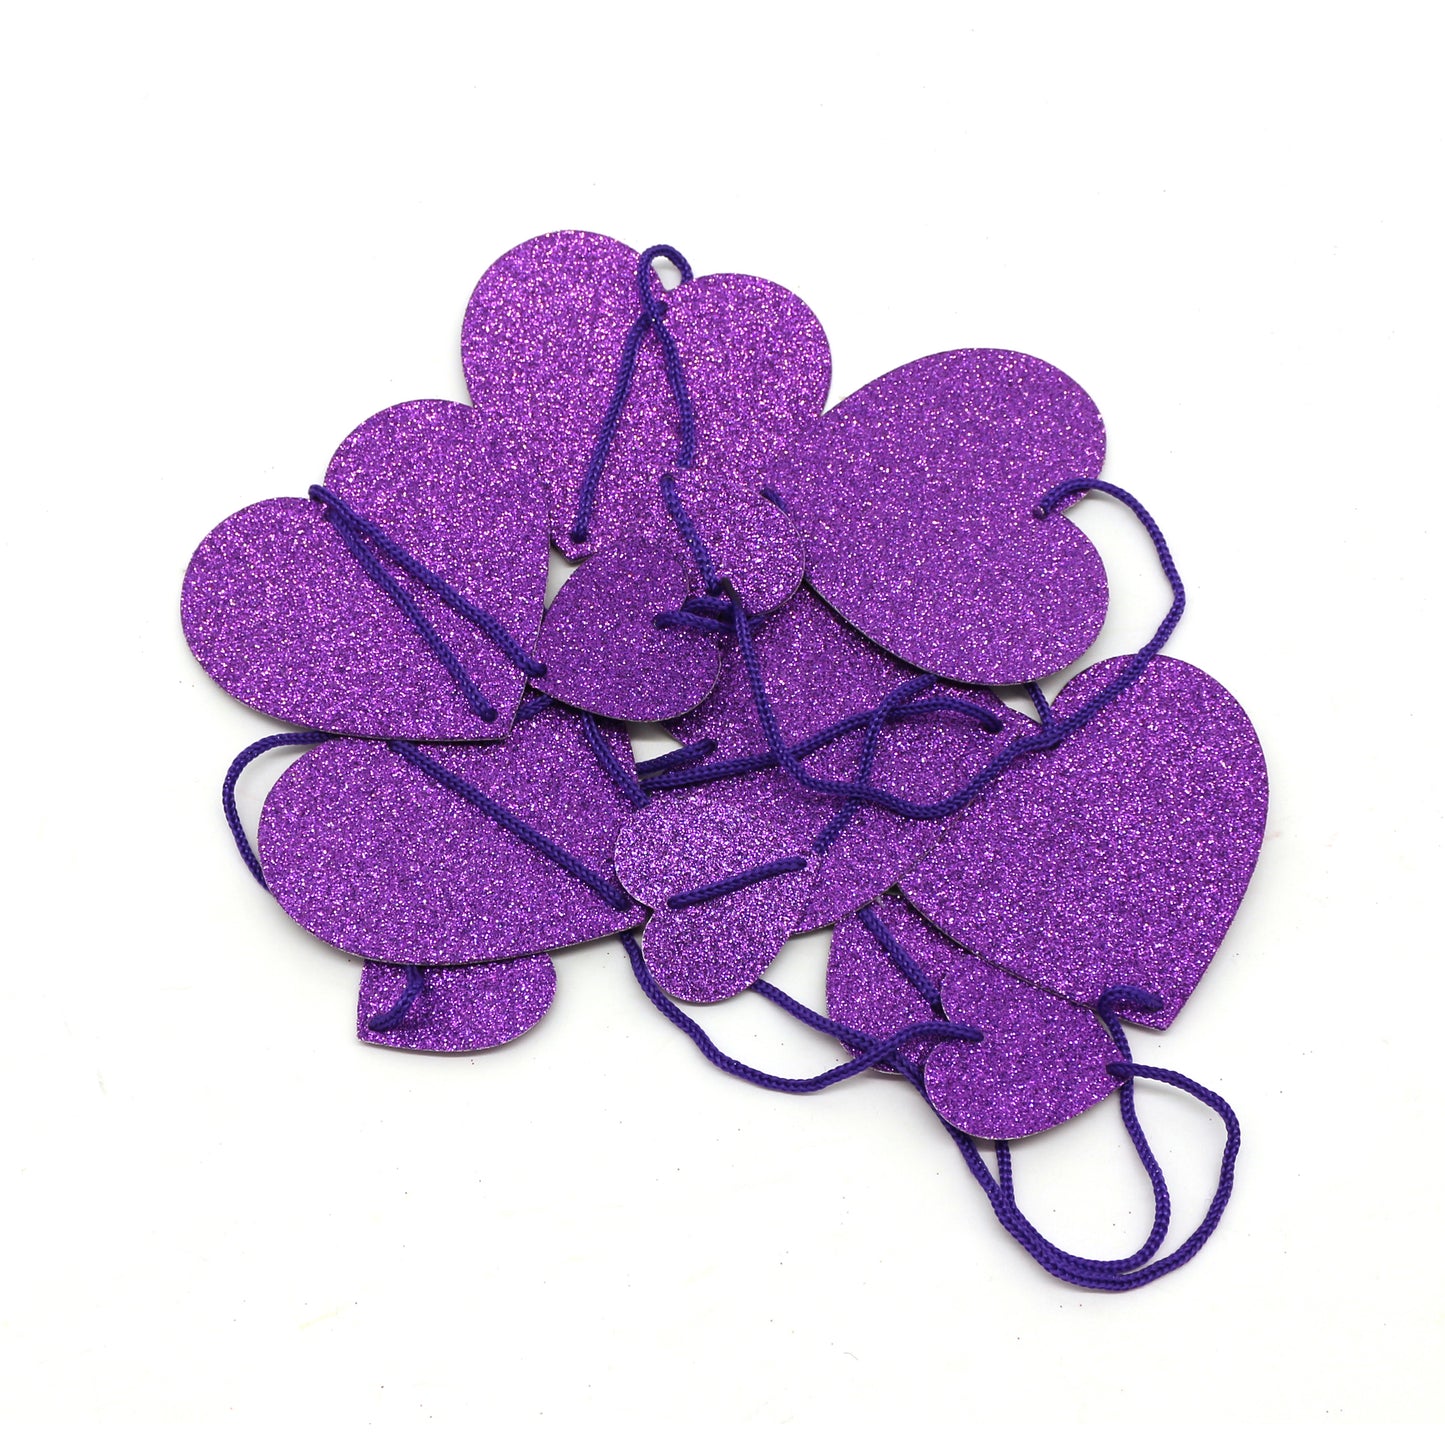 CVHOMEDECO. Twinkle Glittered Paper Heart Shape String Garland Unique Hanging Bunting Banner for Wedding Birthday Party Festival Home Background Decoration, 5.5 feet, Pack of 2 PCS (Purple)